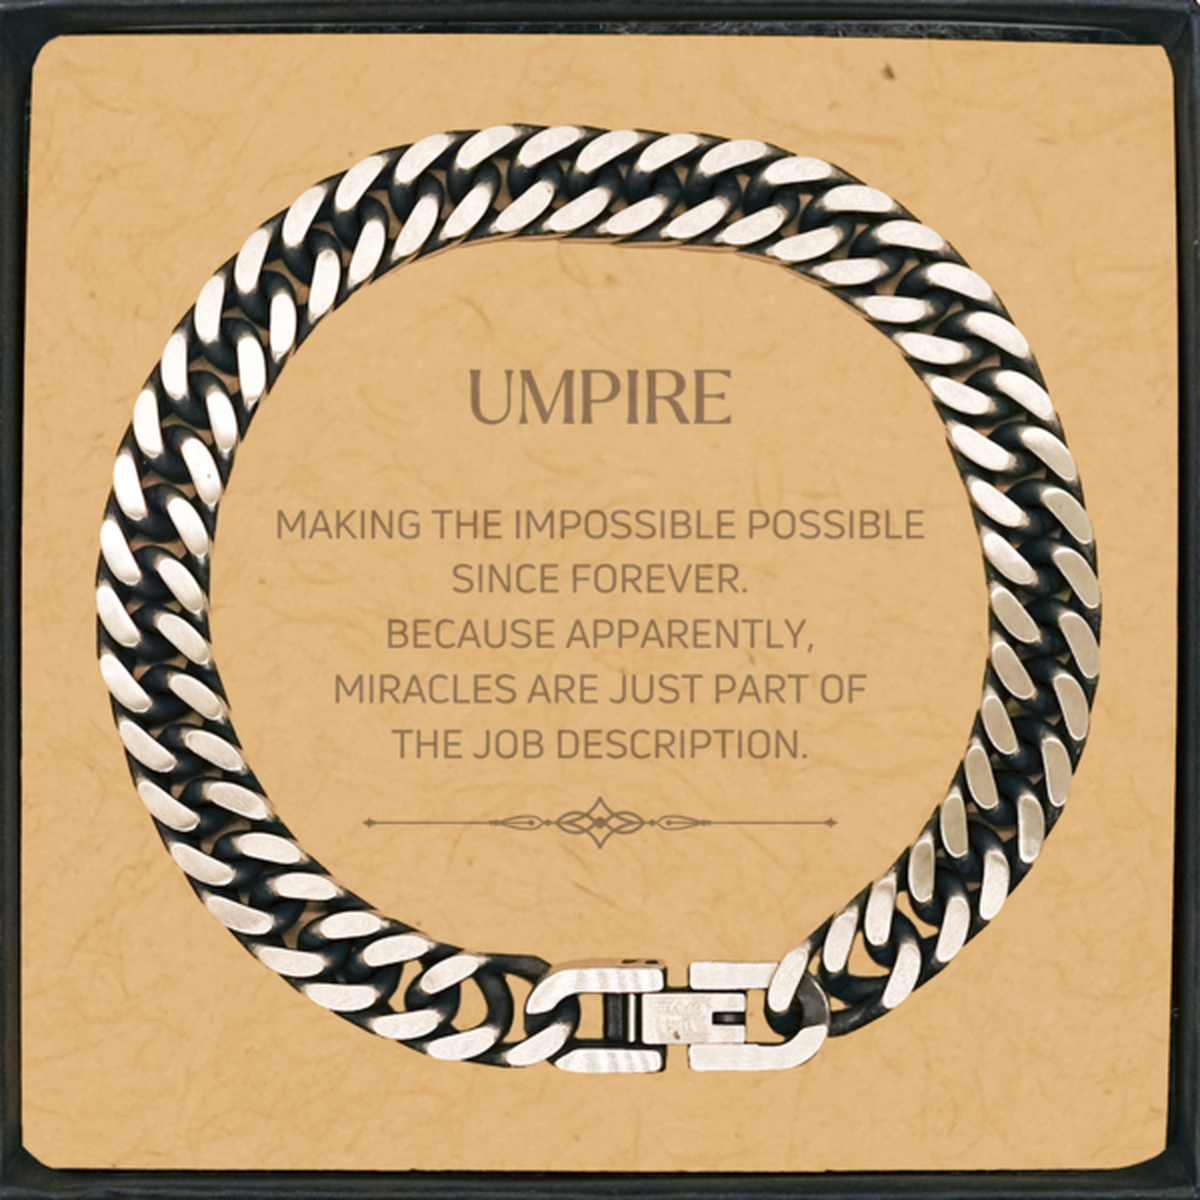 Funny Umpire Gifts, Miracles are just part of the job description, Inspirational Birthday Cuban Link Chain Bracelet For Umpire, Men, Women, Coworkers, Friends, Boss